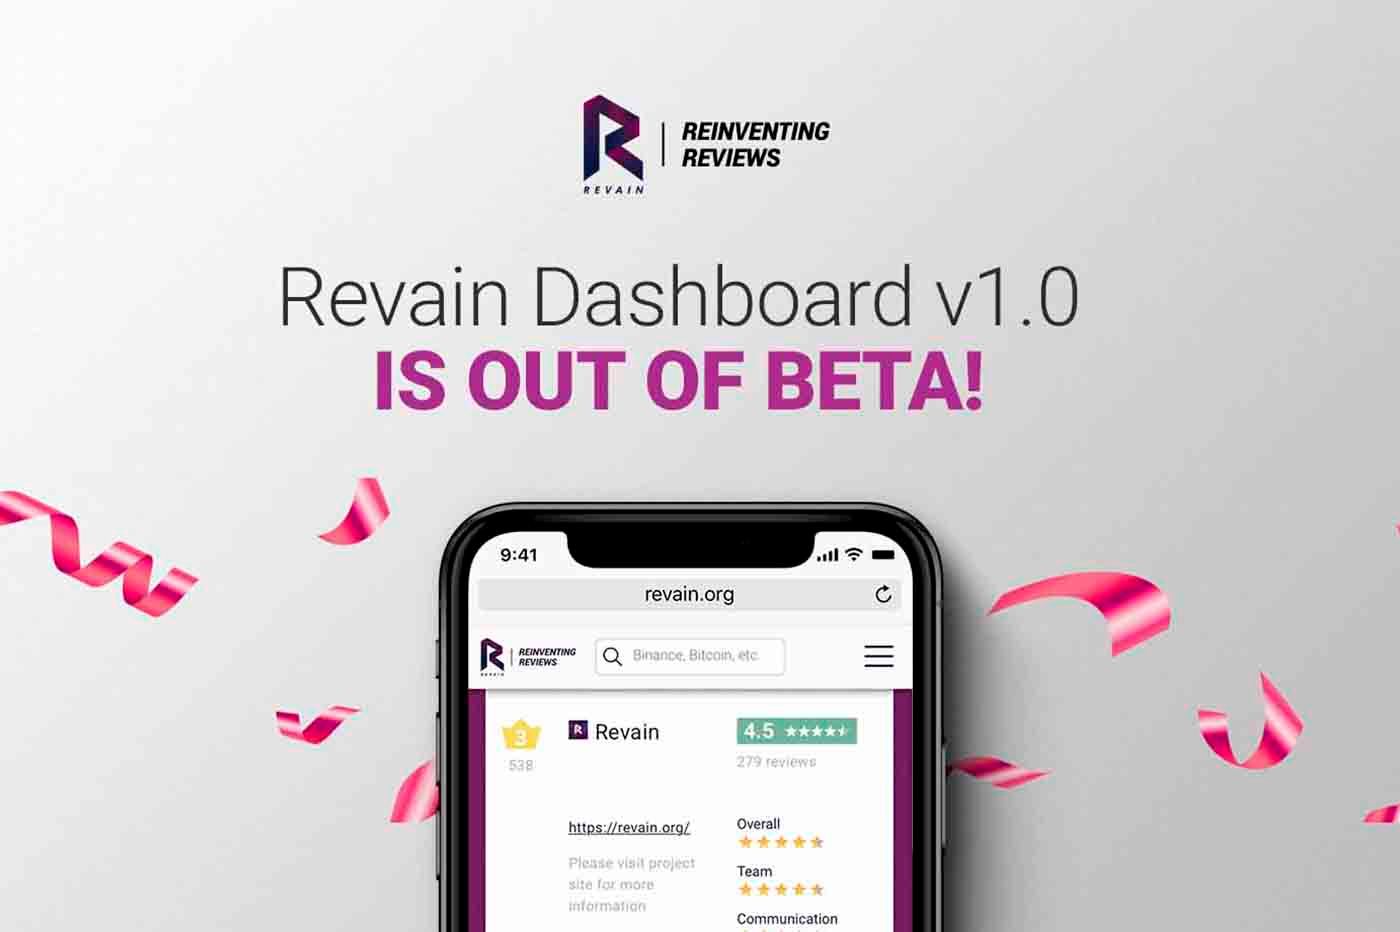 Revain v1.0 goes out of beta in a full-scale working version and what to expect next